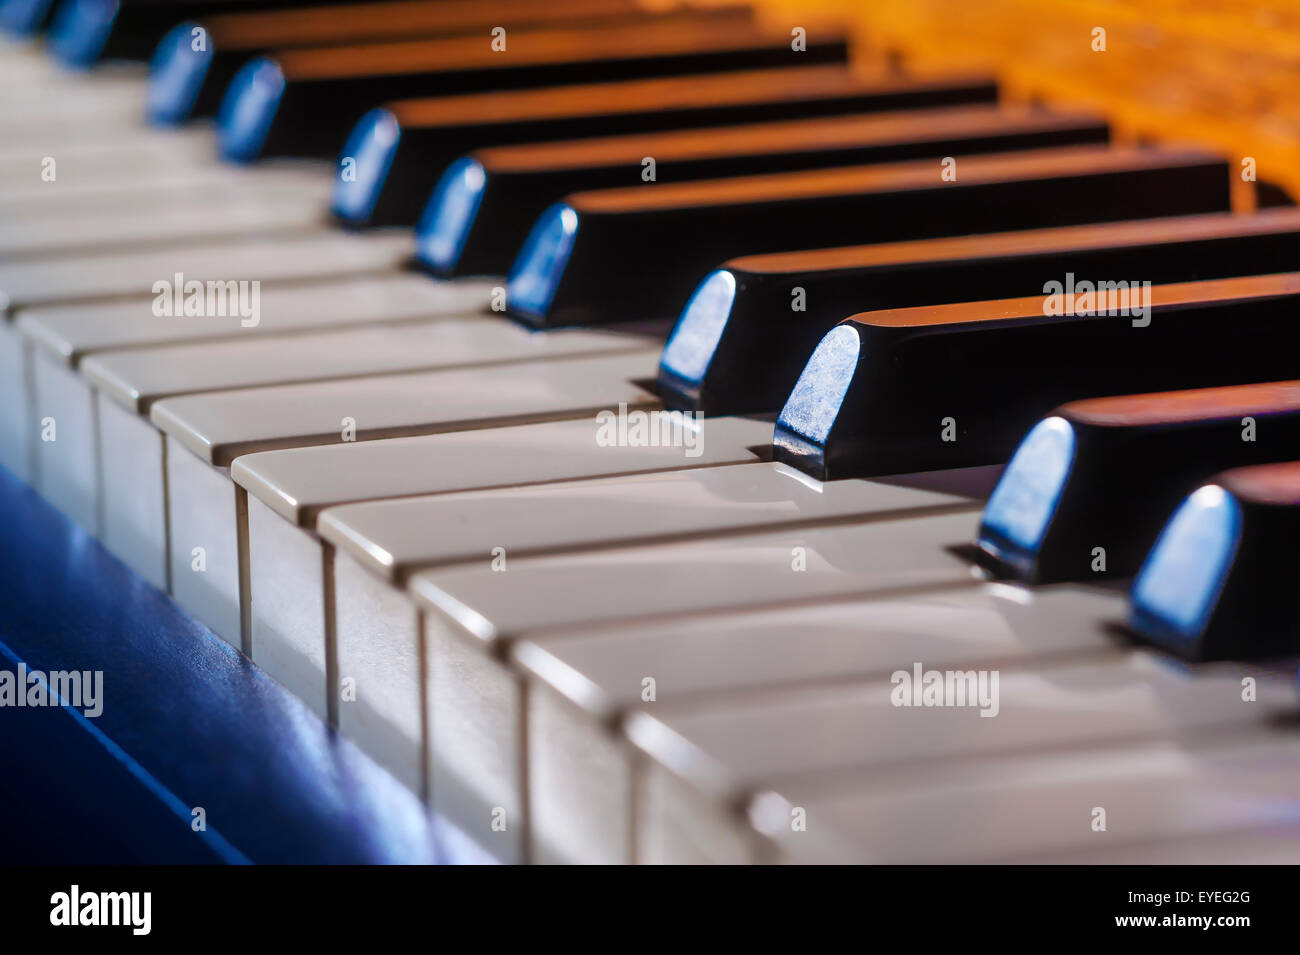 Piano keys in cool blue and warm orange Stock Photo - Alamy